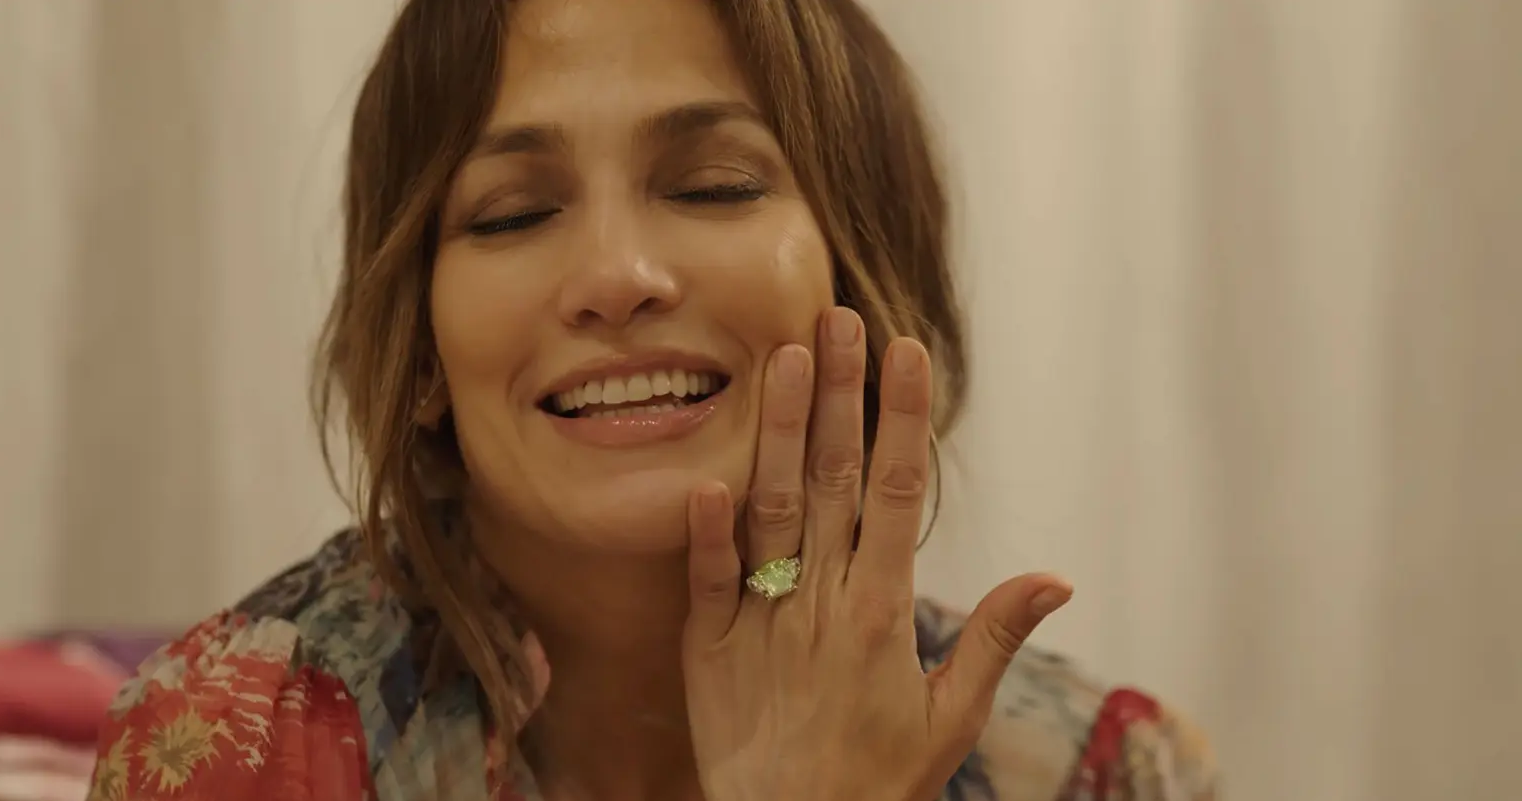 Lopez showing her valuable, green diamond engagement ring